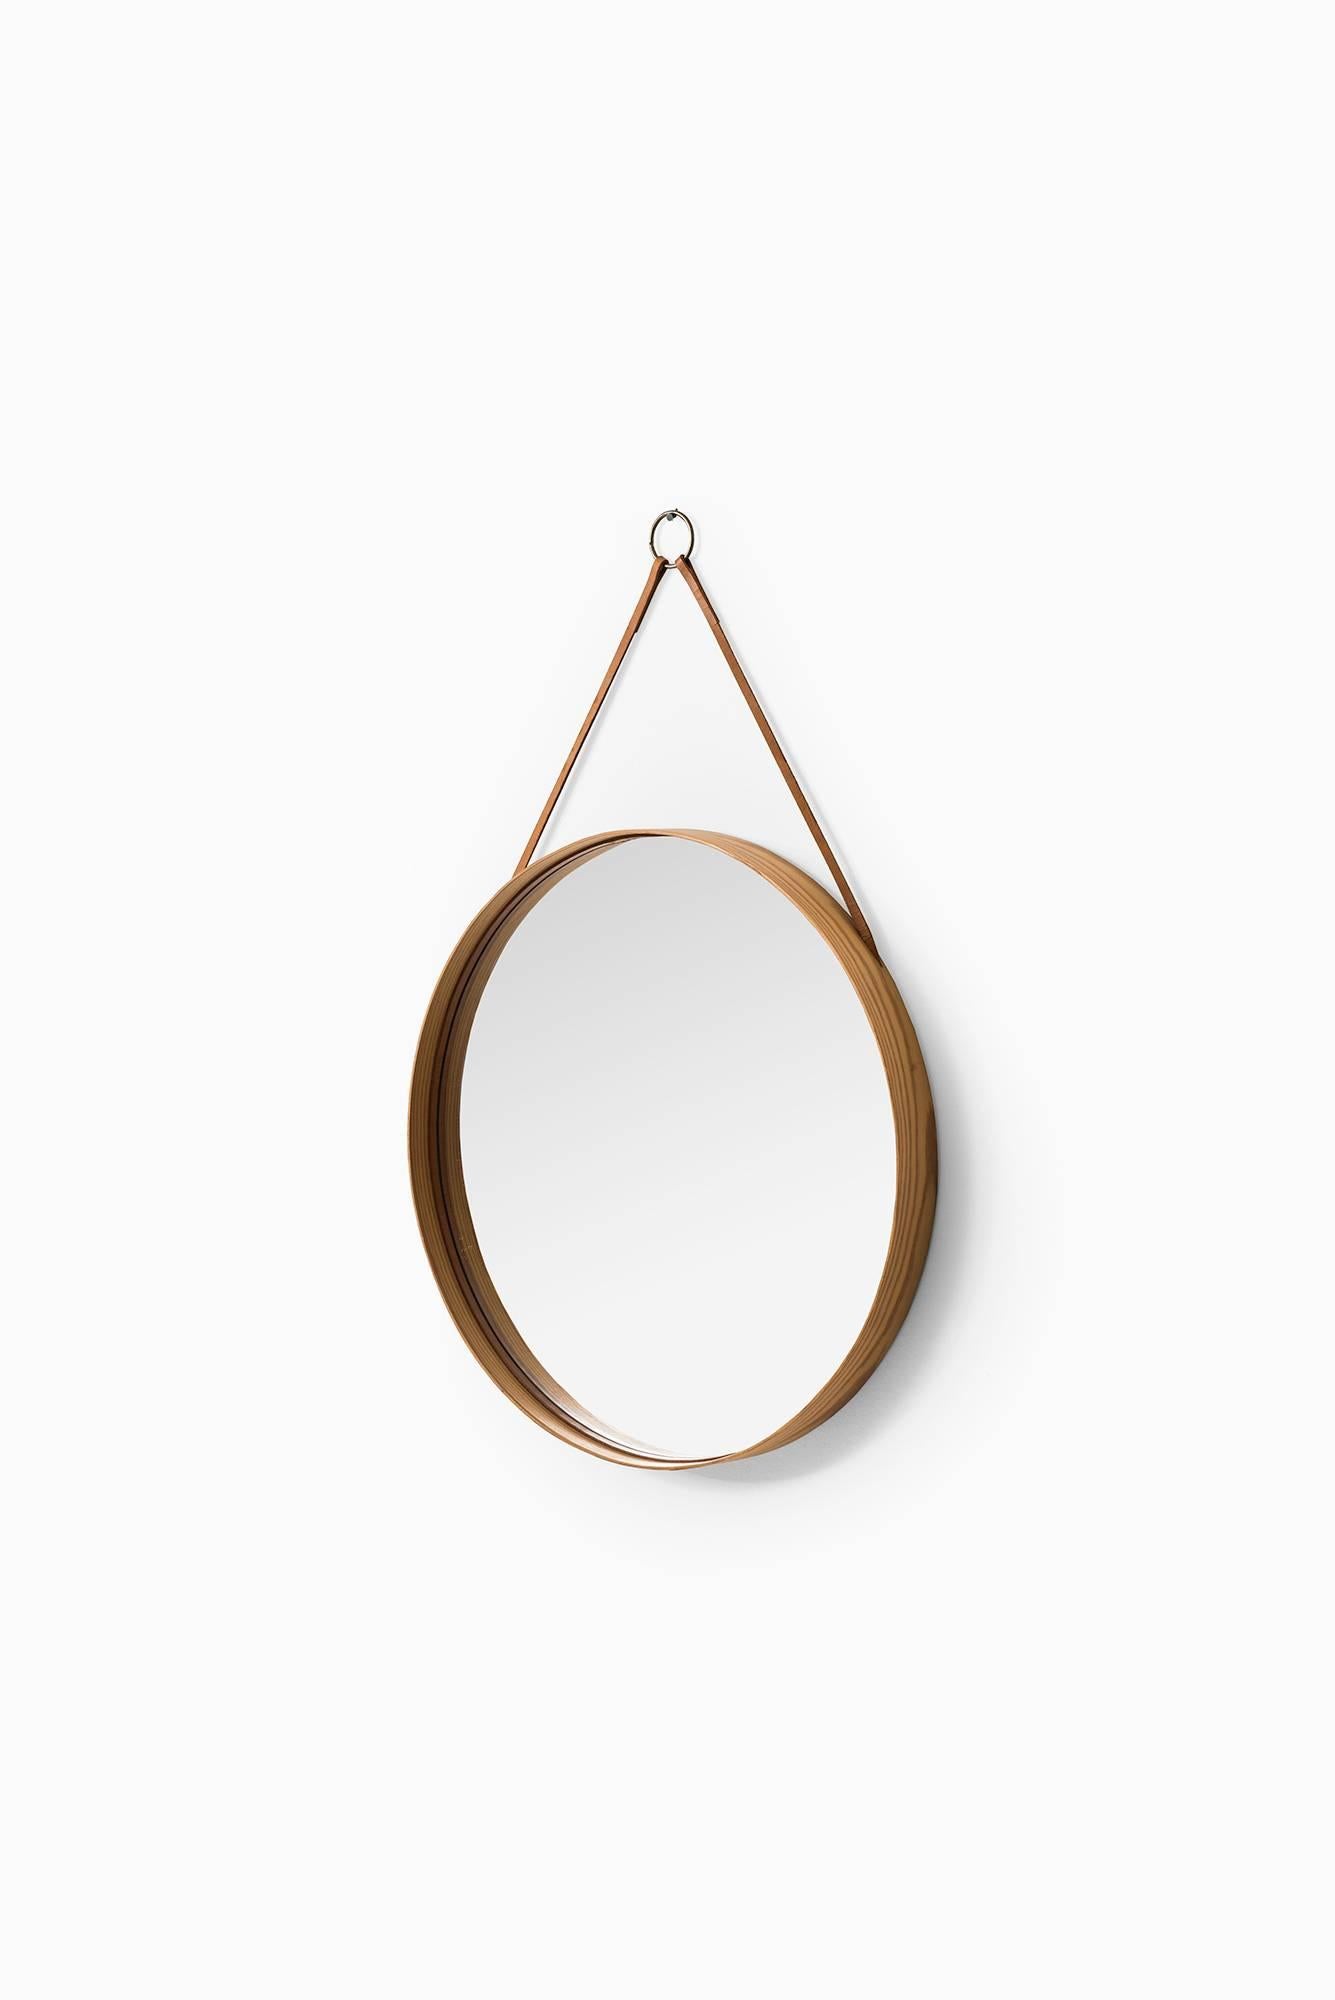 Round mirror in pine and leather model nr 103. Produced by Glasmäster in Markaryd, Sweden.